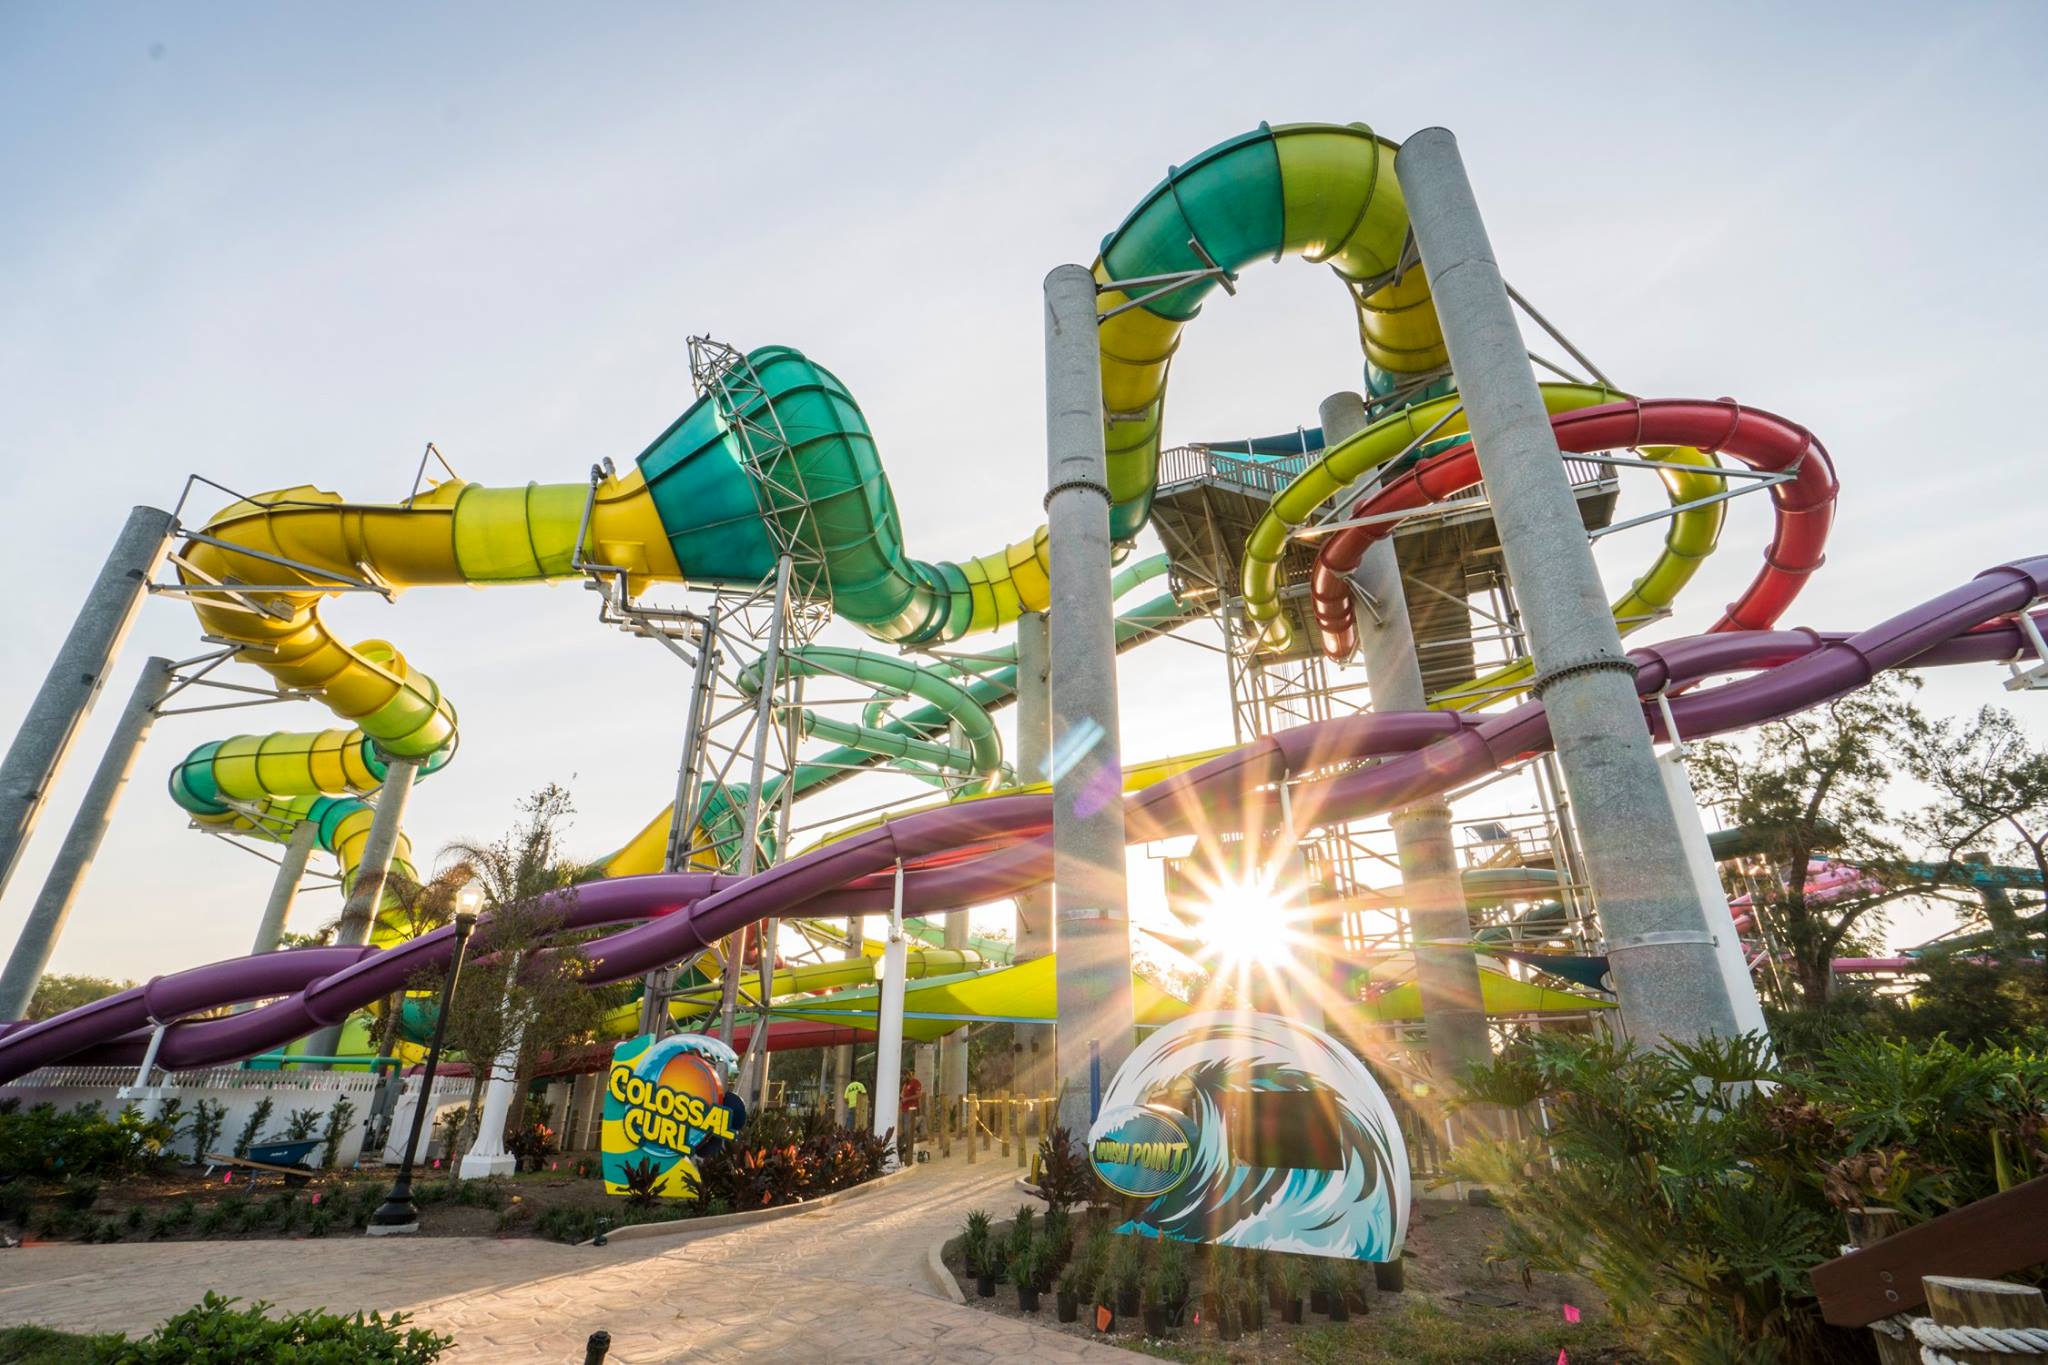 SUMMER SPLASHES ON AT ADVENTURE ISLAND WITH EXTENDED 2018 SEASON!